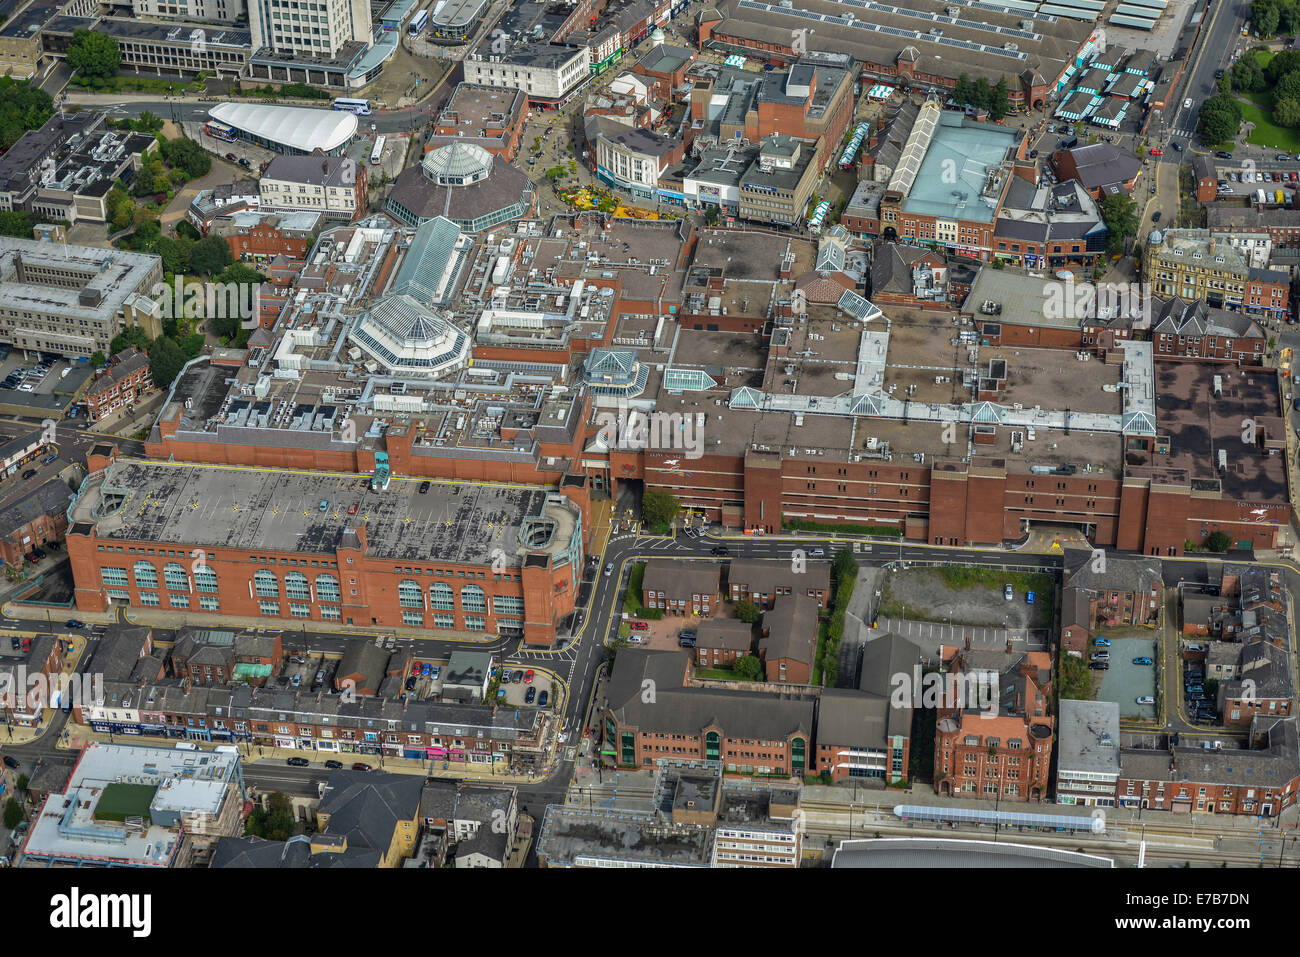 An aerial view of The Spindles, a Shopping Centre in Oldham, a town in Greater Manchester, UK. Stock Photo